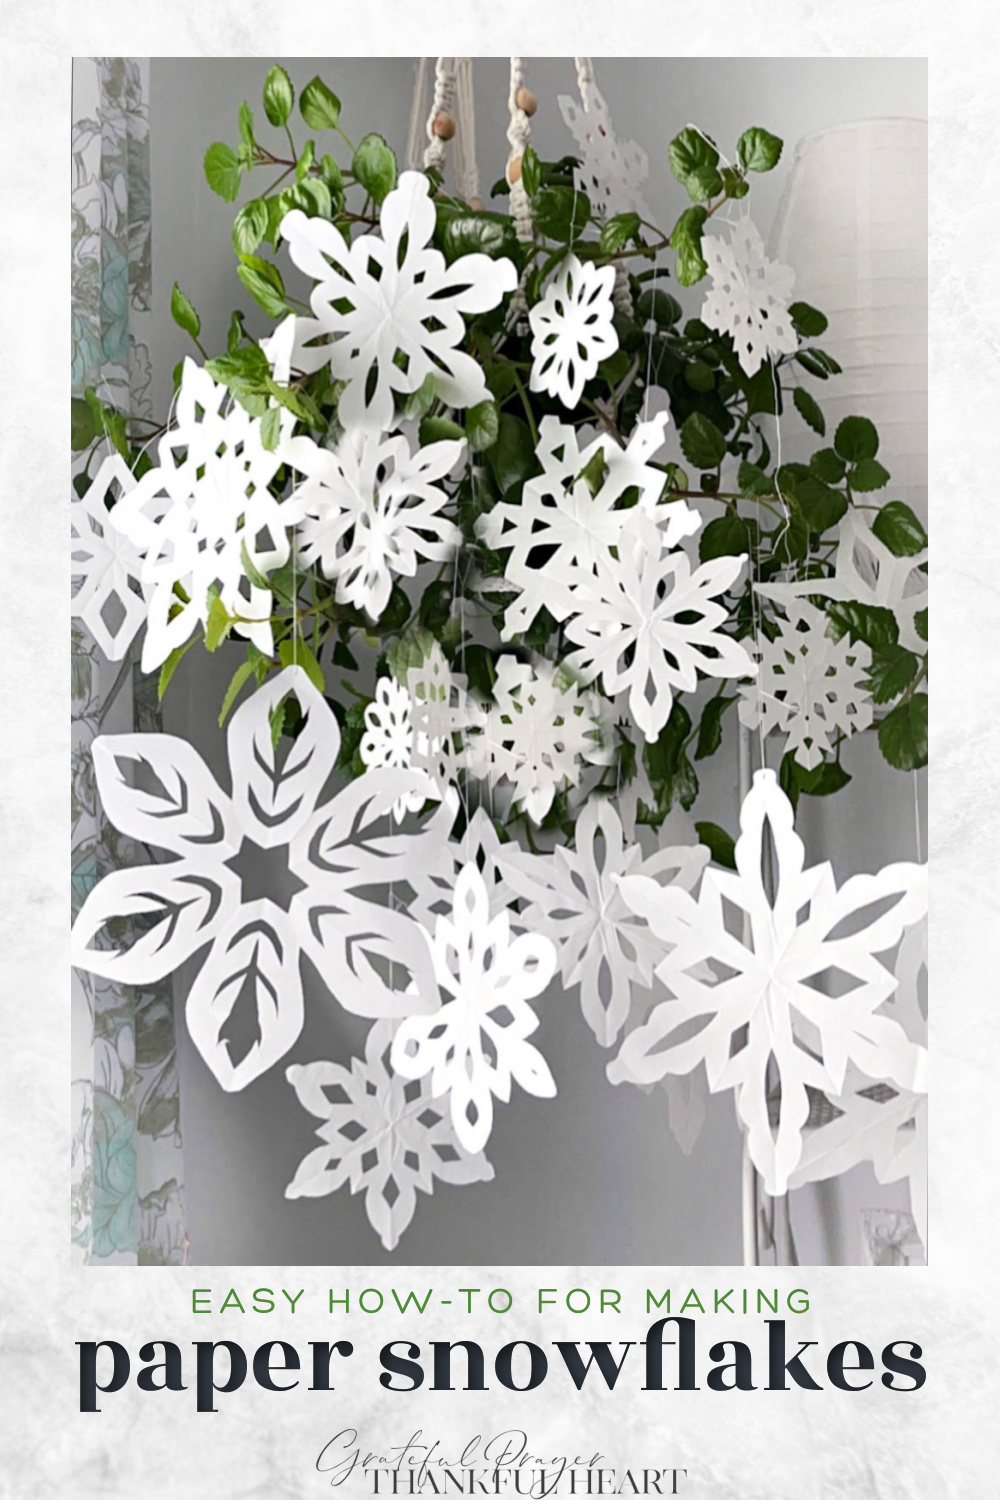 Simple how-to for paper snowflakes. Fun and easy craft for kids. Great winter project using scissors. Decorative for classroom and home.